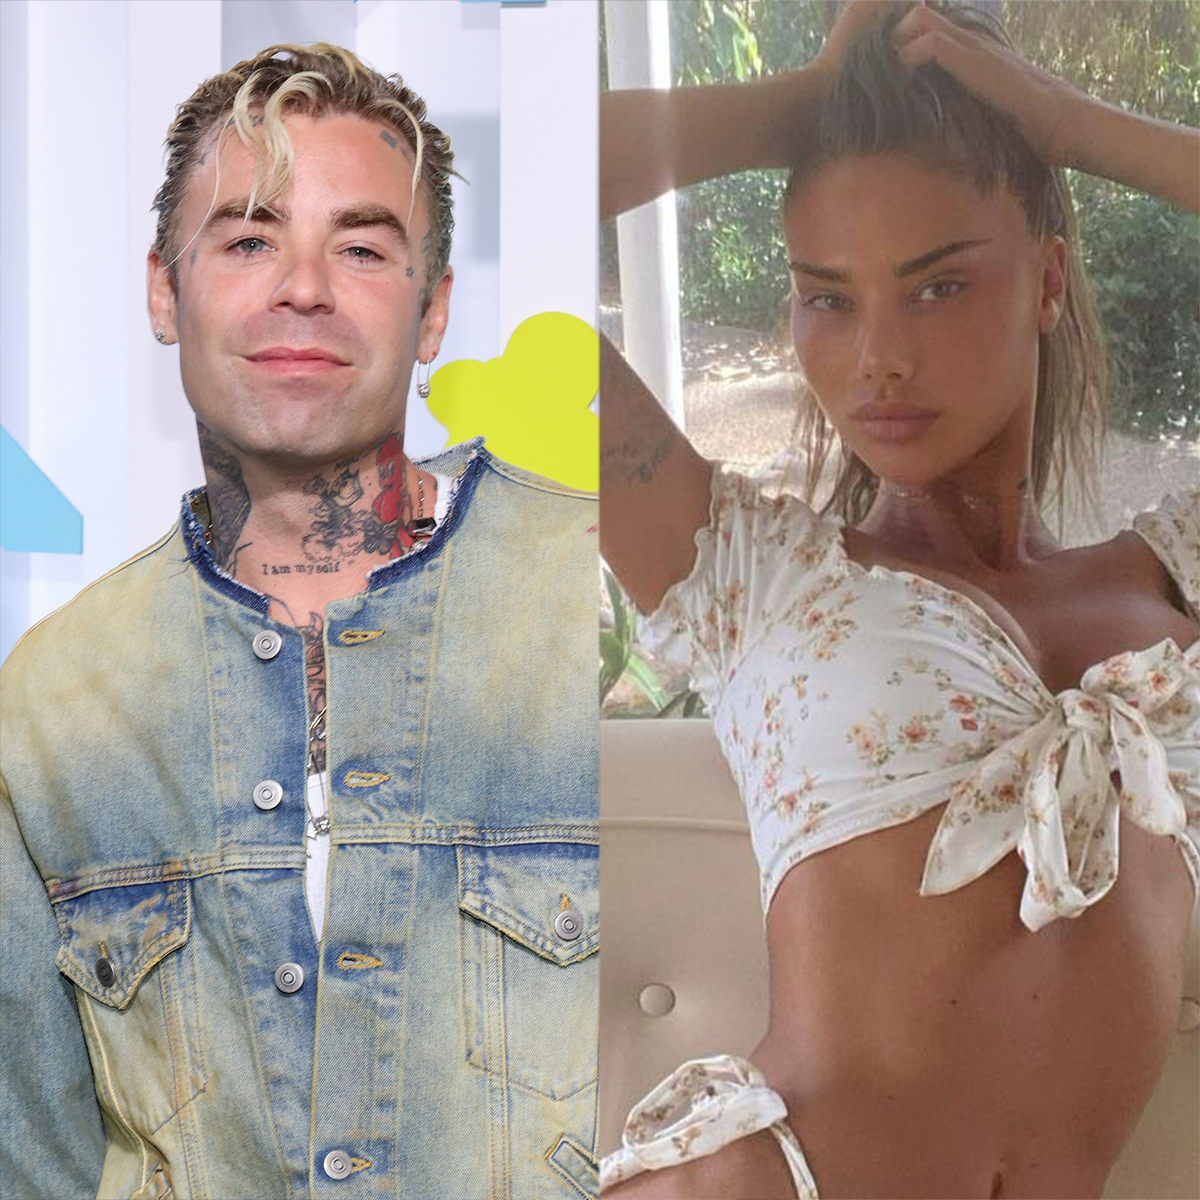 Mod Sun Spotted Kissing Model Sahara Ray After Avril Lavigne Breakup